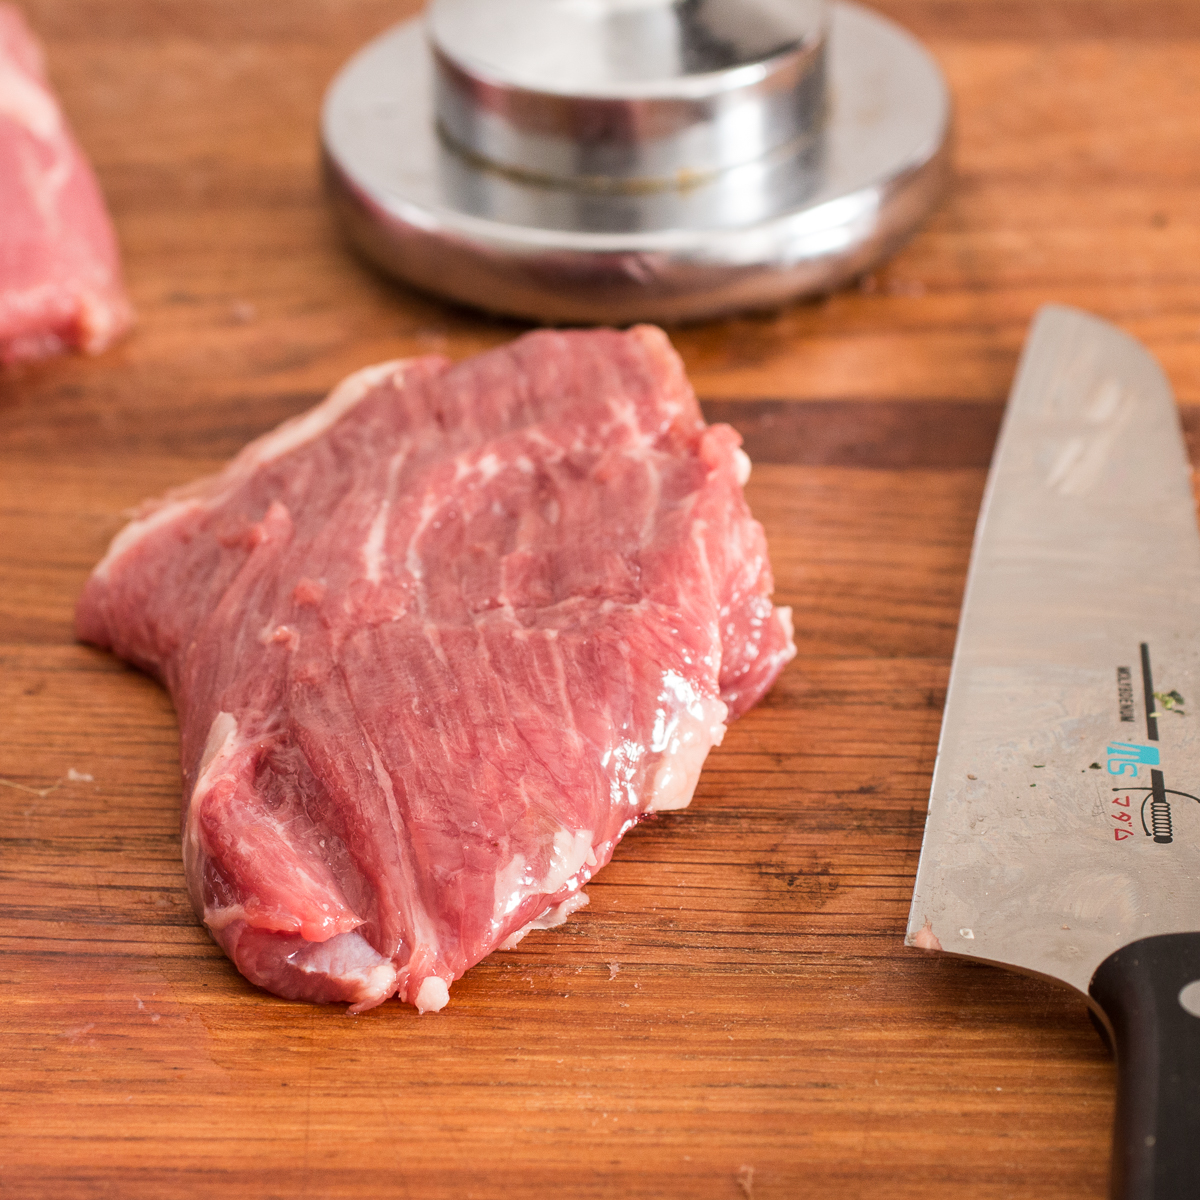 A thick slice of lamb loin next to a knife.